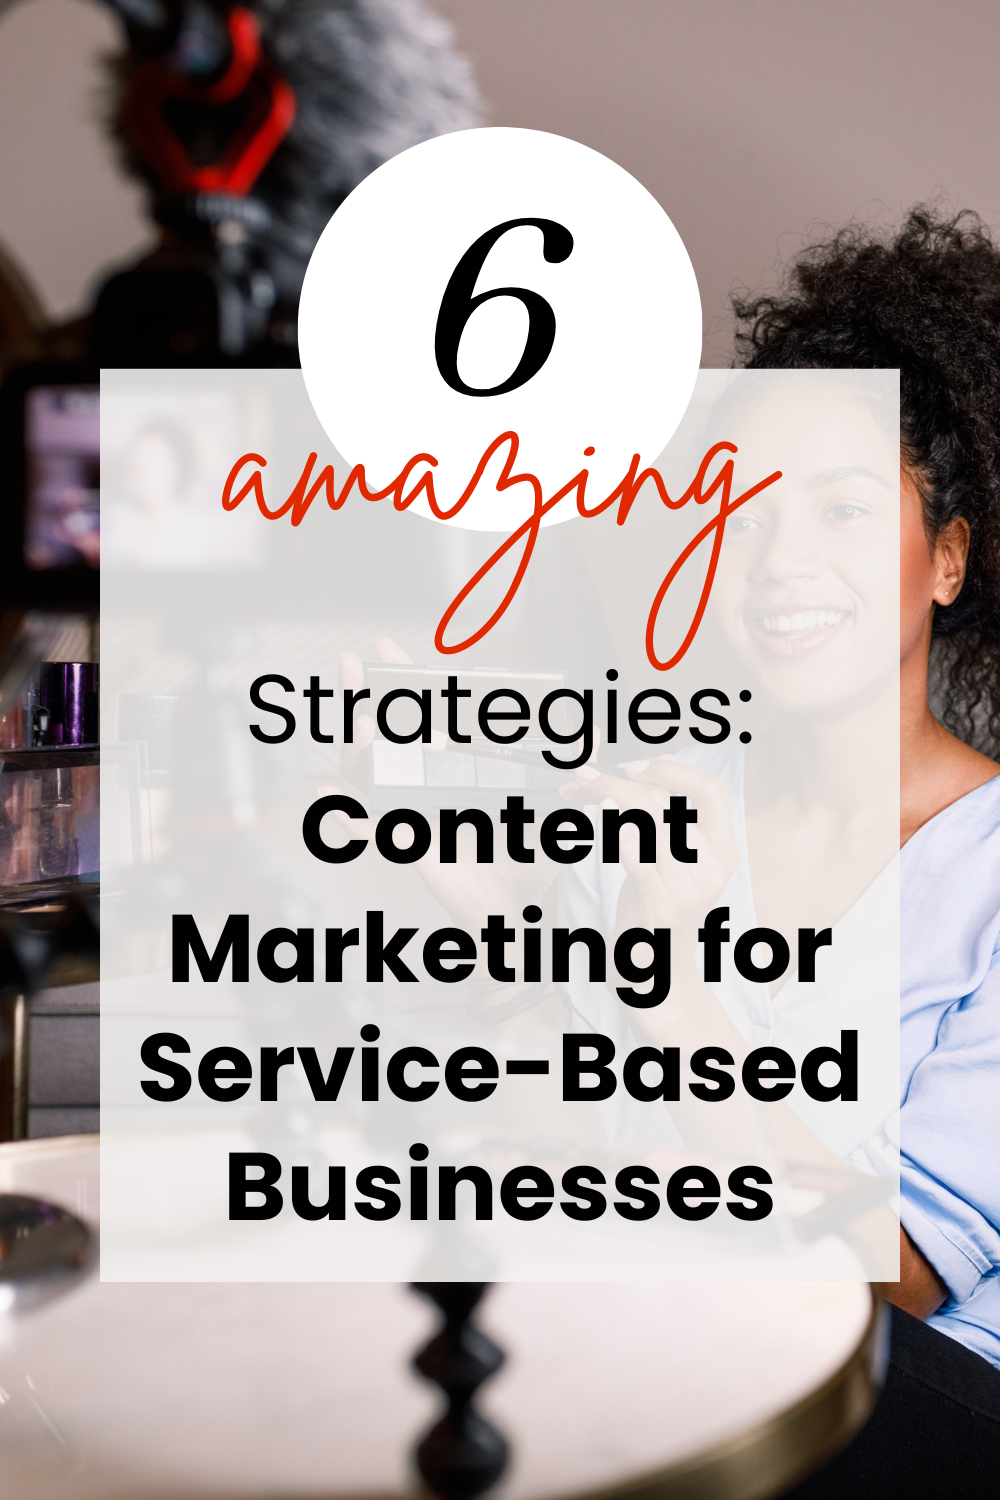 Content Marketing Mastery: Your Winning Playbook for Service-Based Businesses